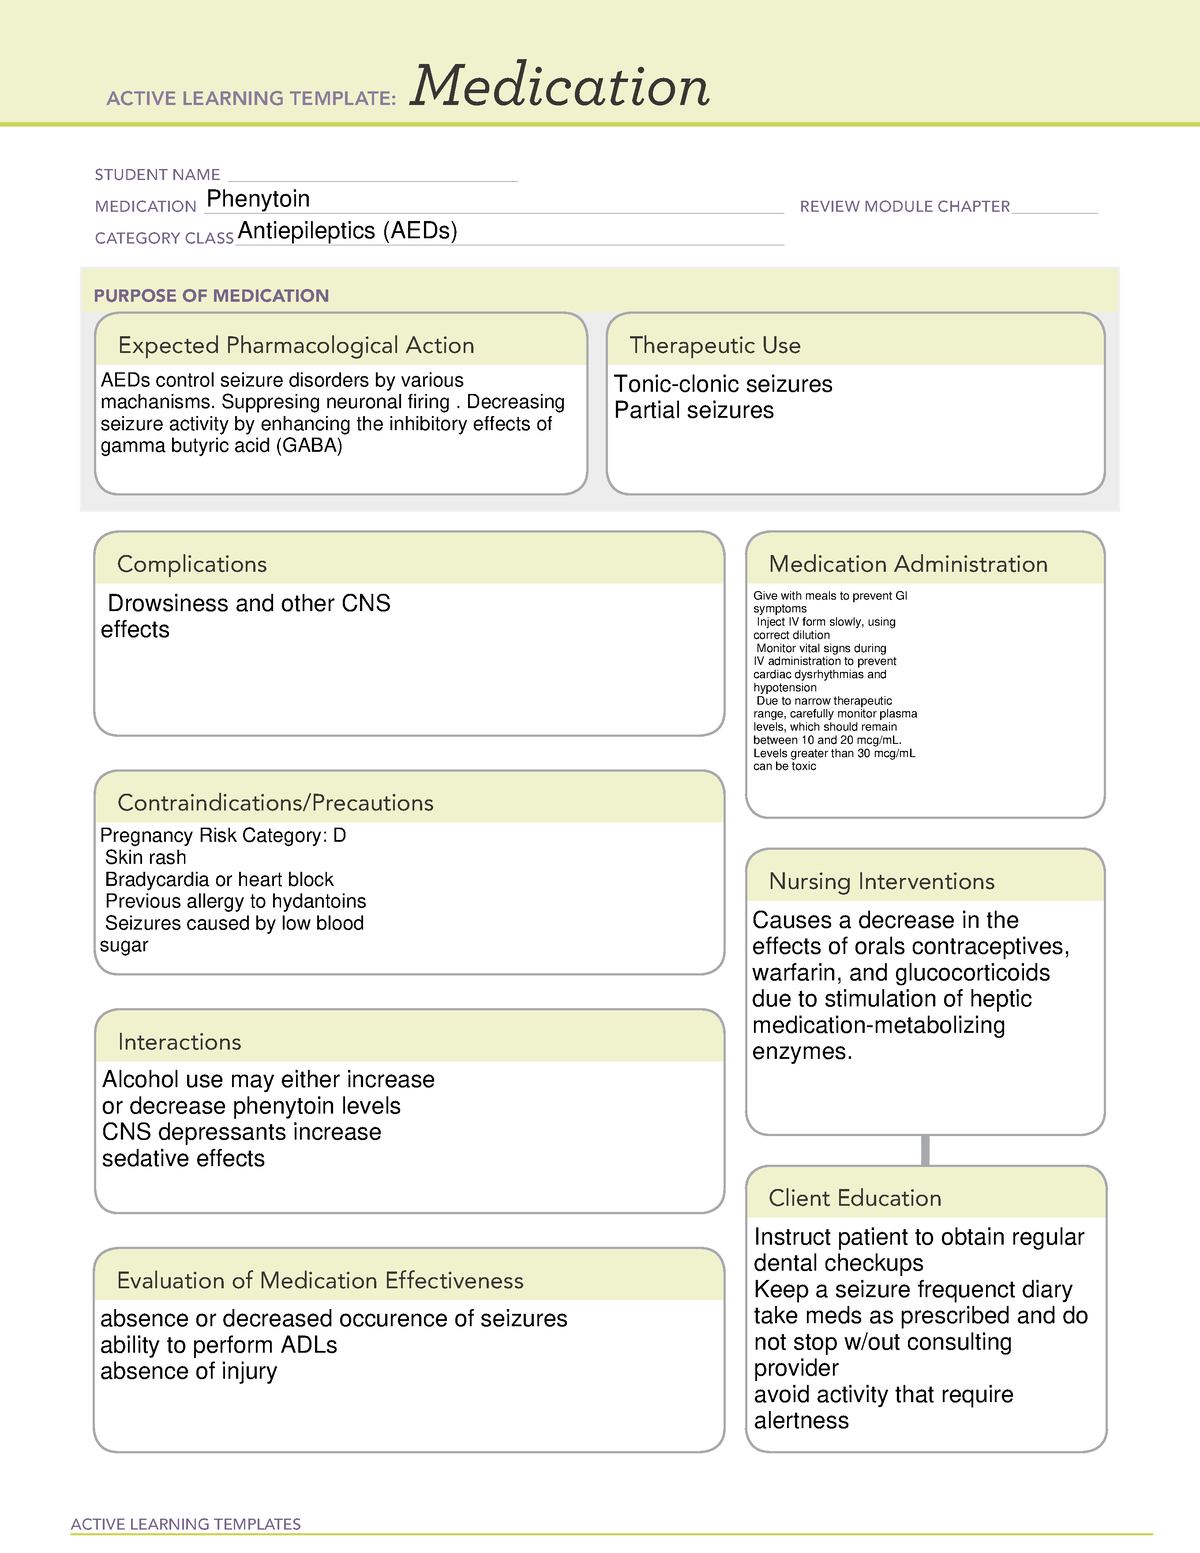 ati-medication-card-template-phenytoin-active-learning-templates